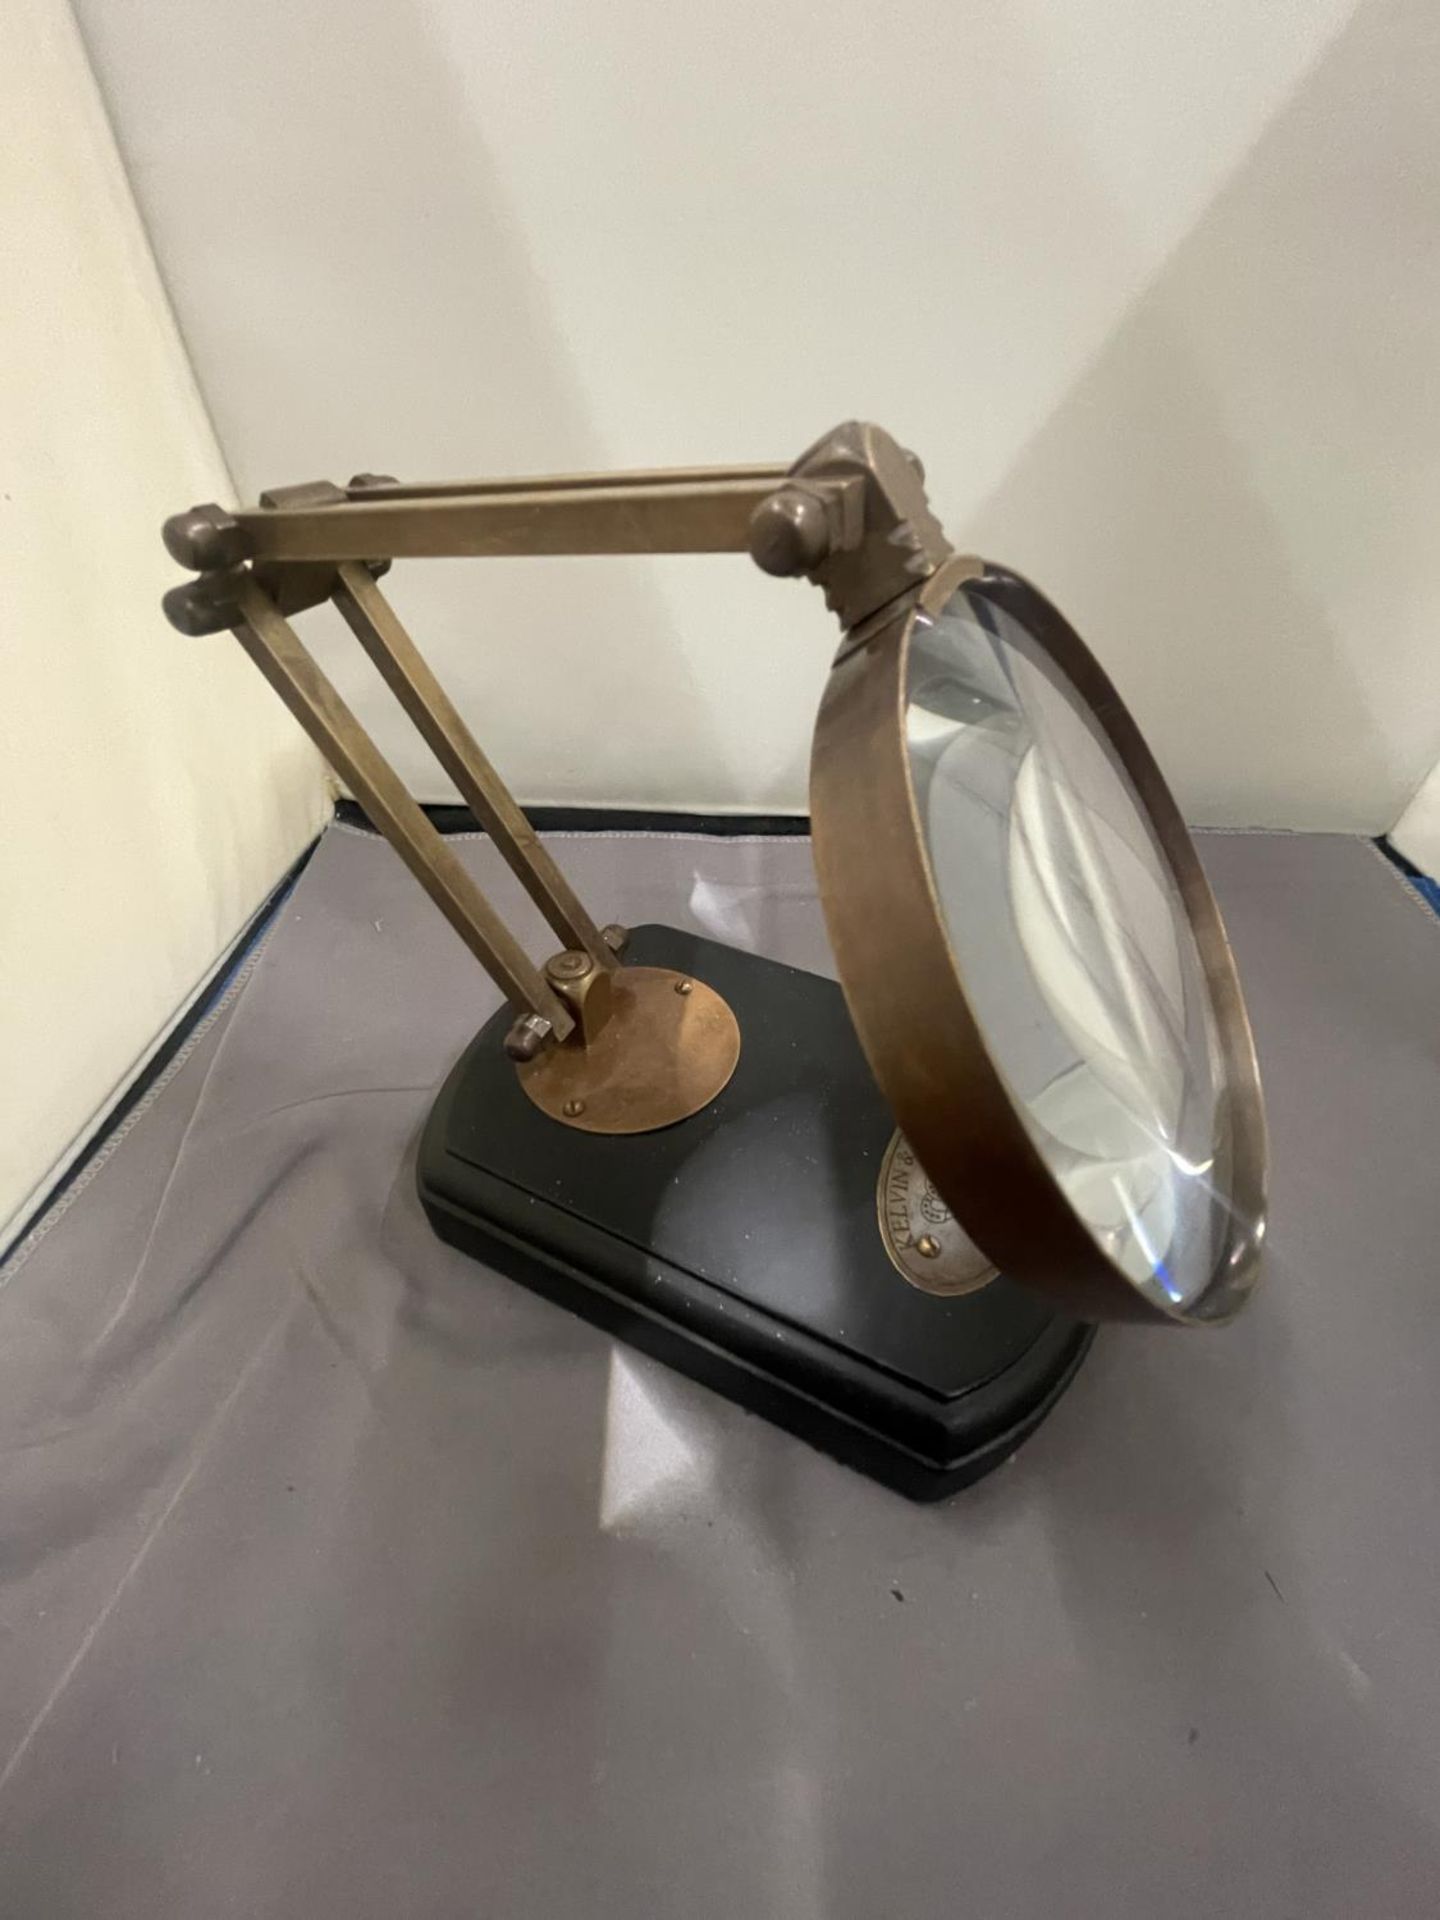 A BRASS MAGNIFYING GLASS ON A WOODEN BASE - Image 4 of 6